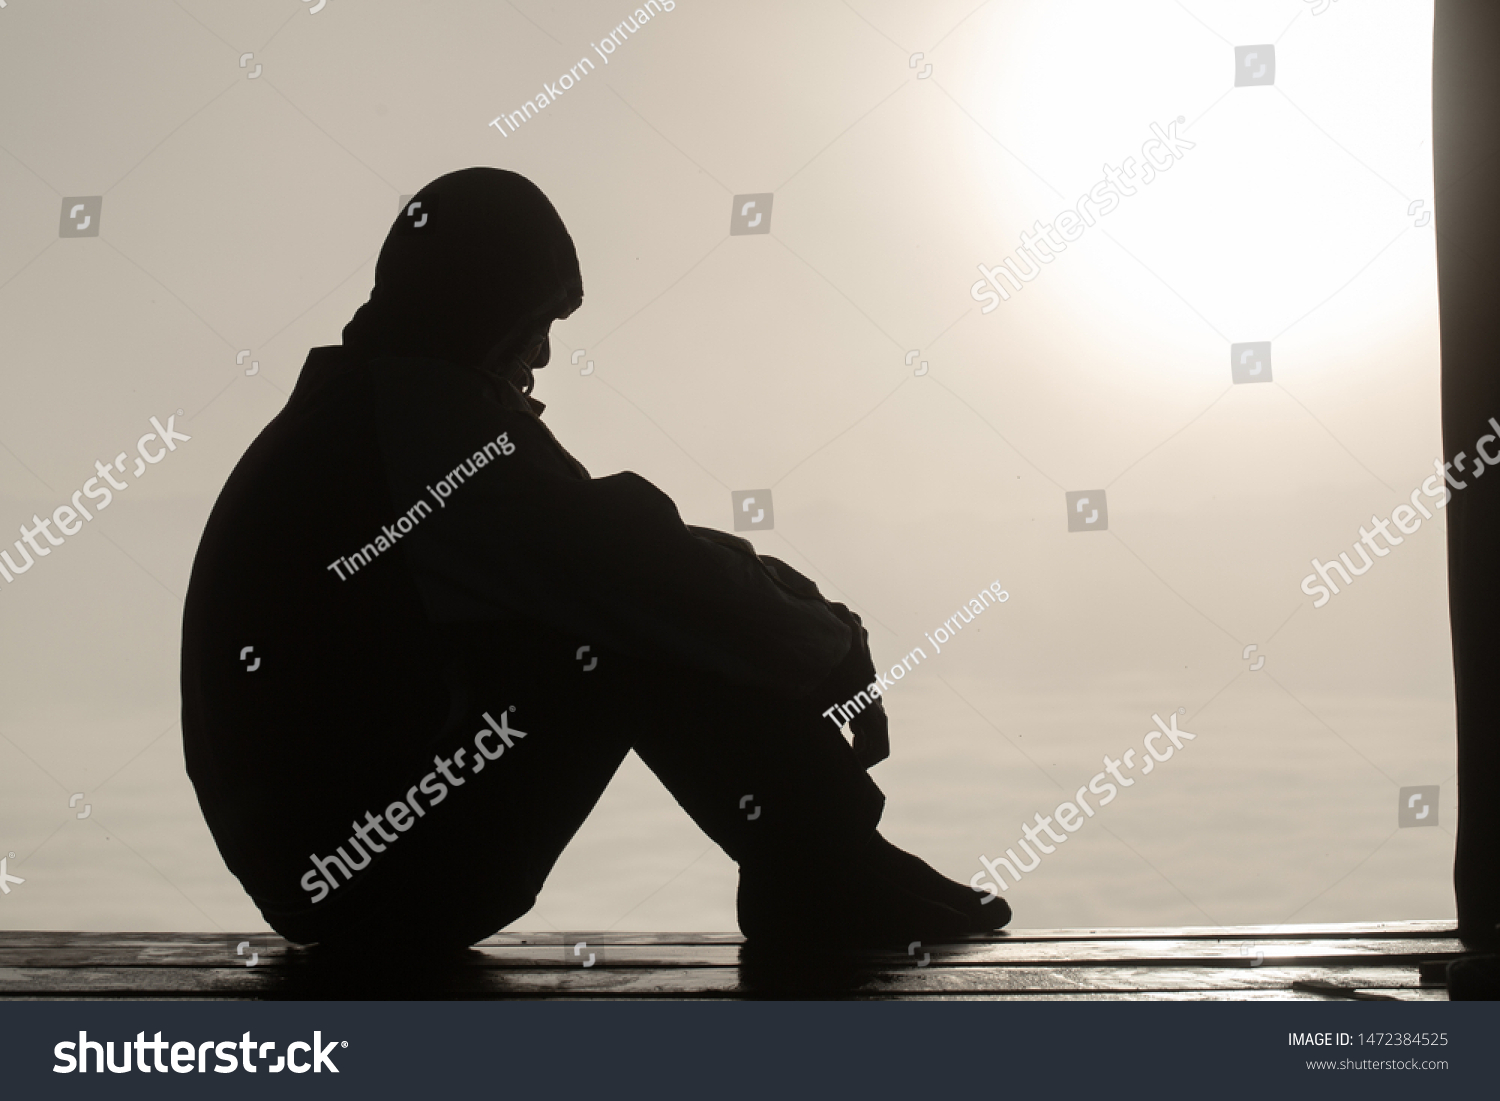 The silhouette of stressed and depressed man  of working  under pressure and hopefulness, Sad expression, sad emotion, despair, sadness. #1472384525